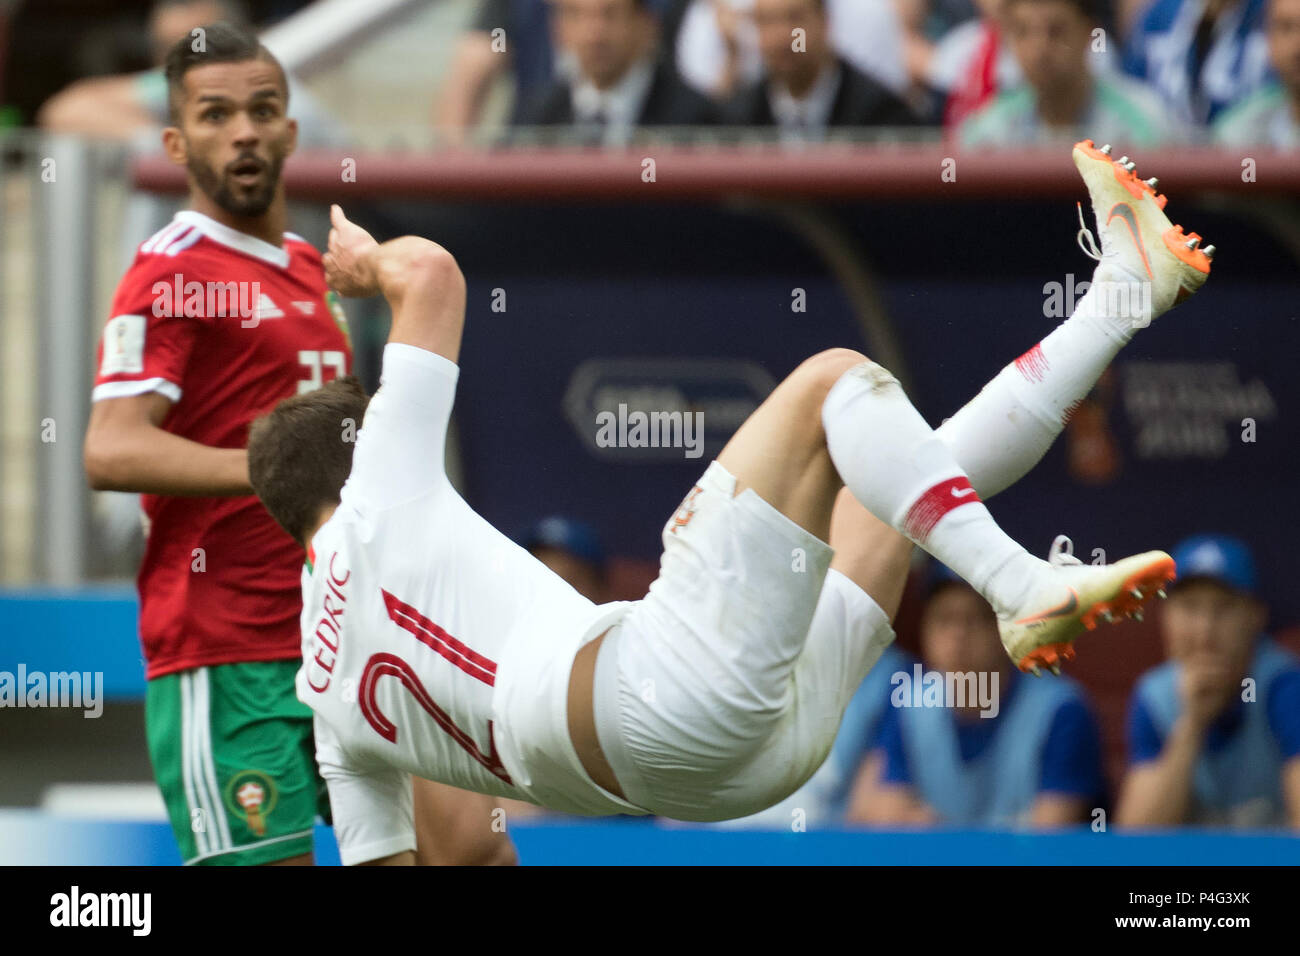 Moscow, Soccer, Russia. 20th June, 2018. World Cup, Portugal vs Morocco, preliminary round, Group B, 2nd match day in the Luzhniki Stadium: Portugal's Cedric Soares (R) and Morocco goalkeeper Ahmed Reda Tagnaouti vying for the ball. Credit: Federico Gambarini/dpa/Alamy Live News Stock Photo